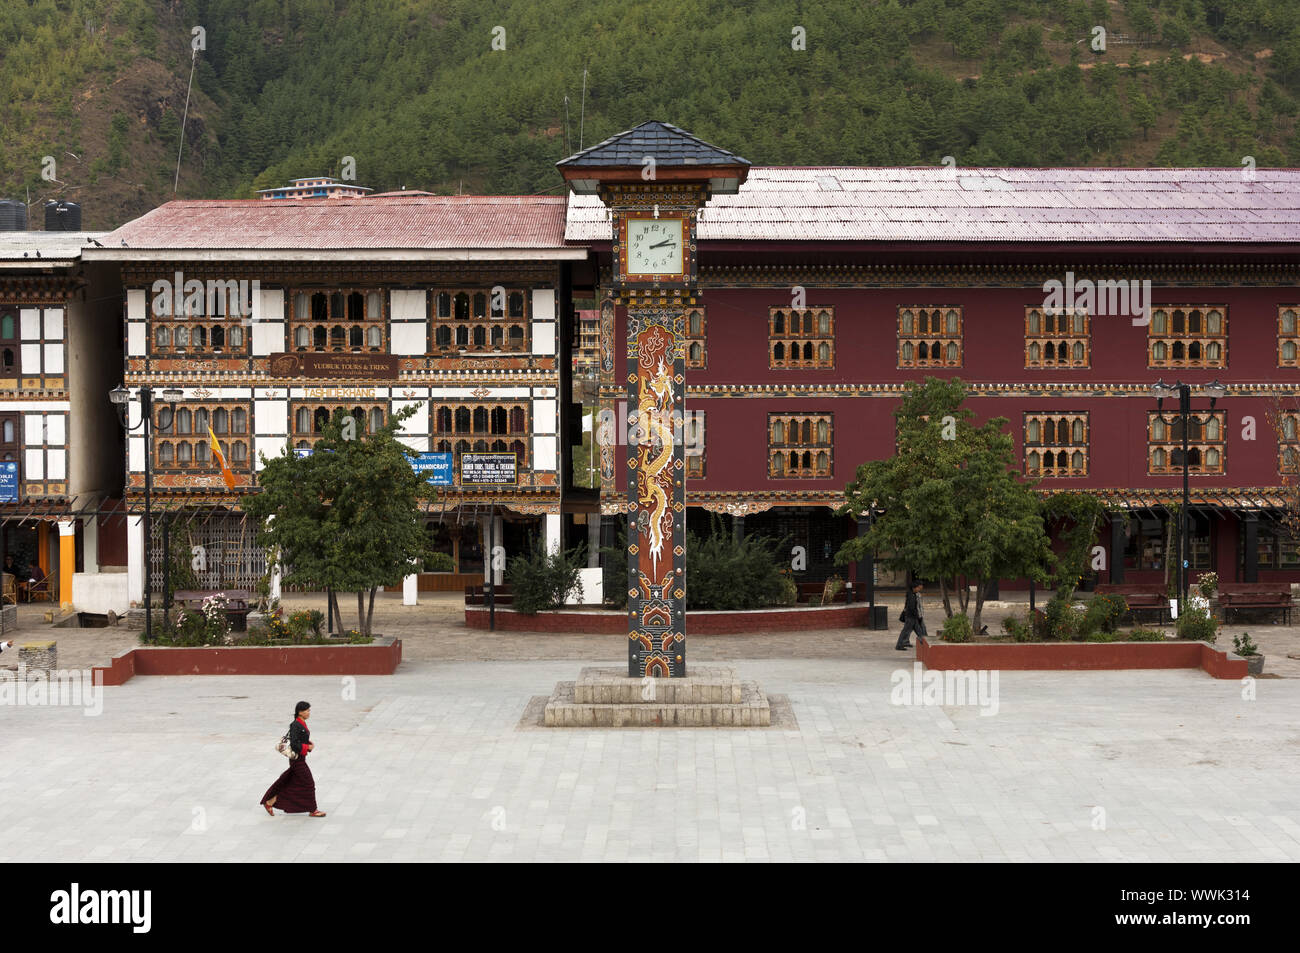 central square with clock tower, Thimphu, Bhutan Stock Photo